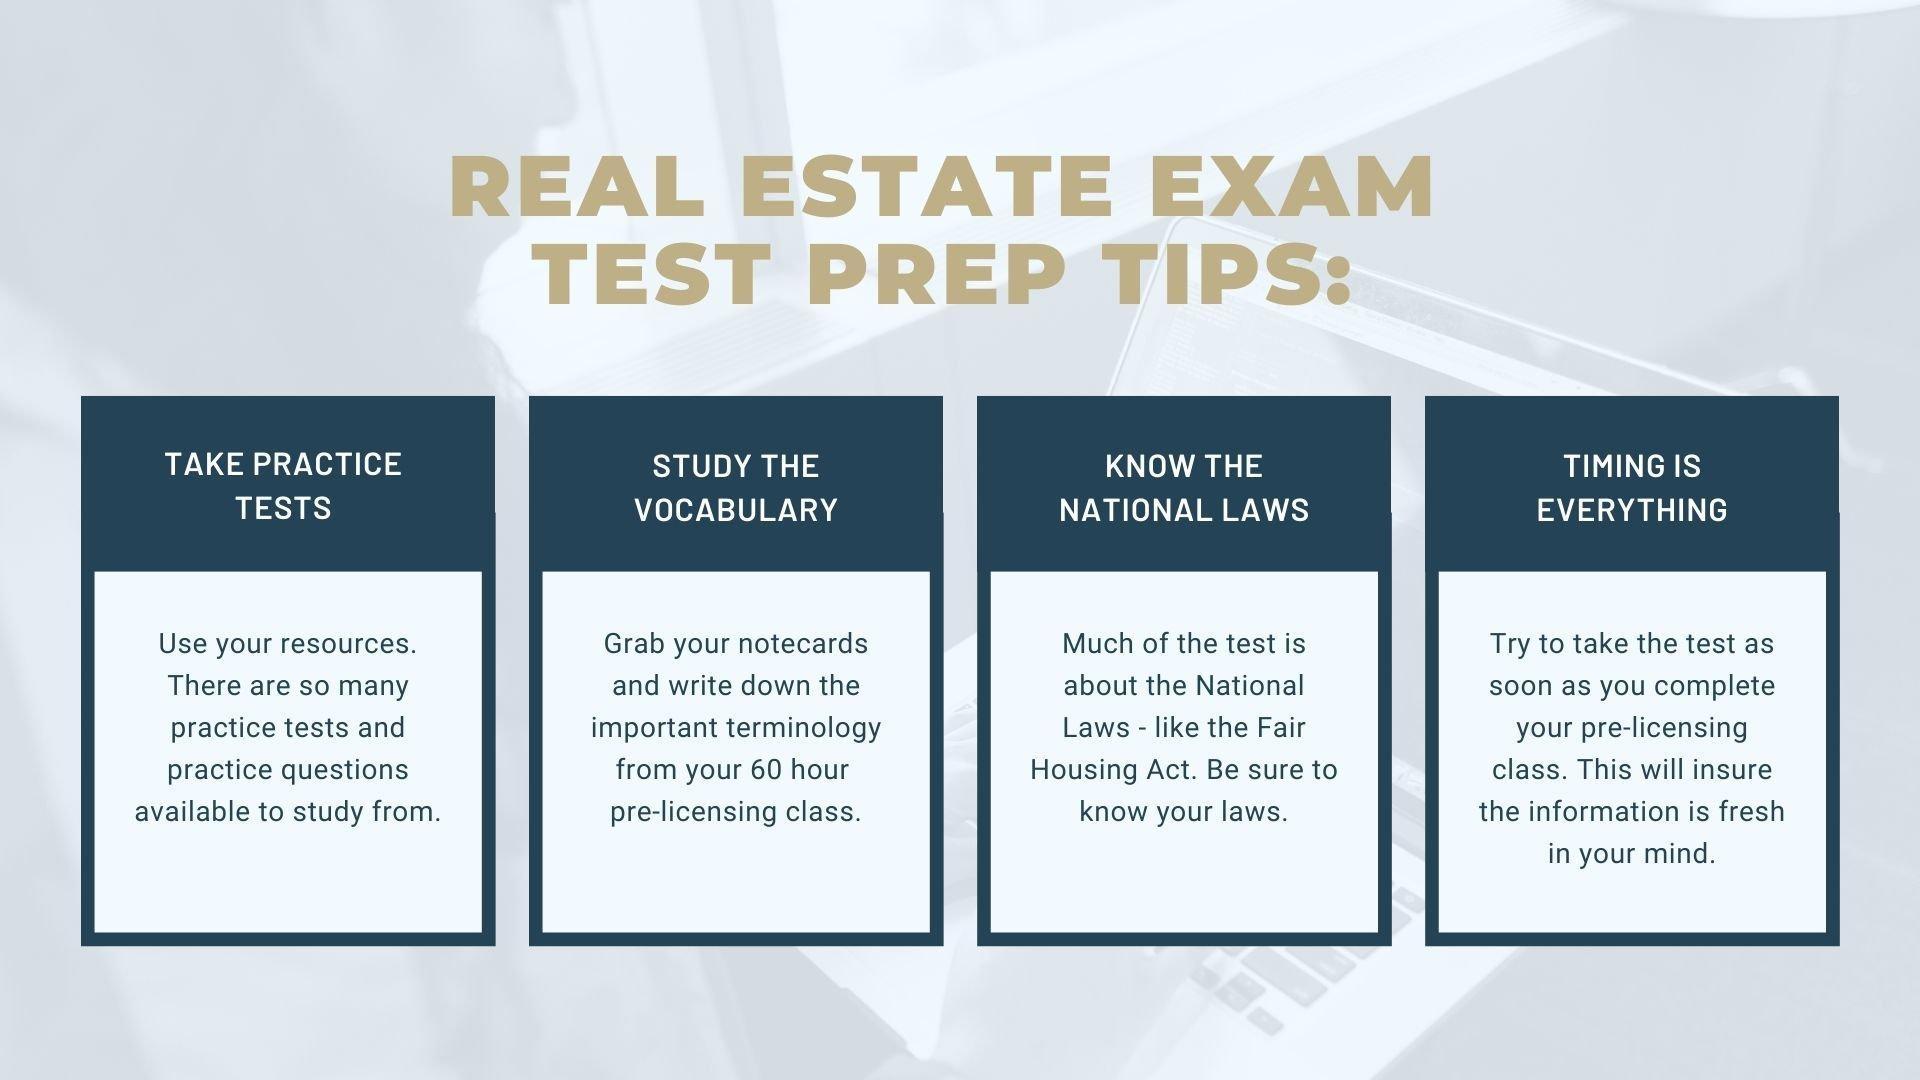 How do i schedule my real estate exam